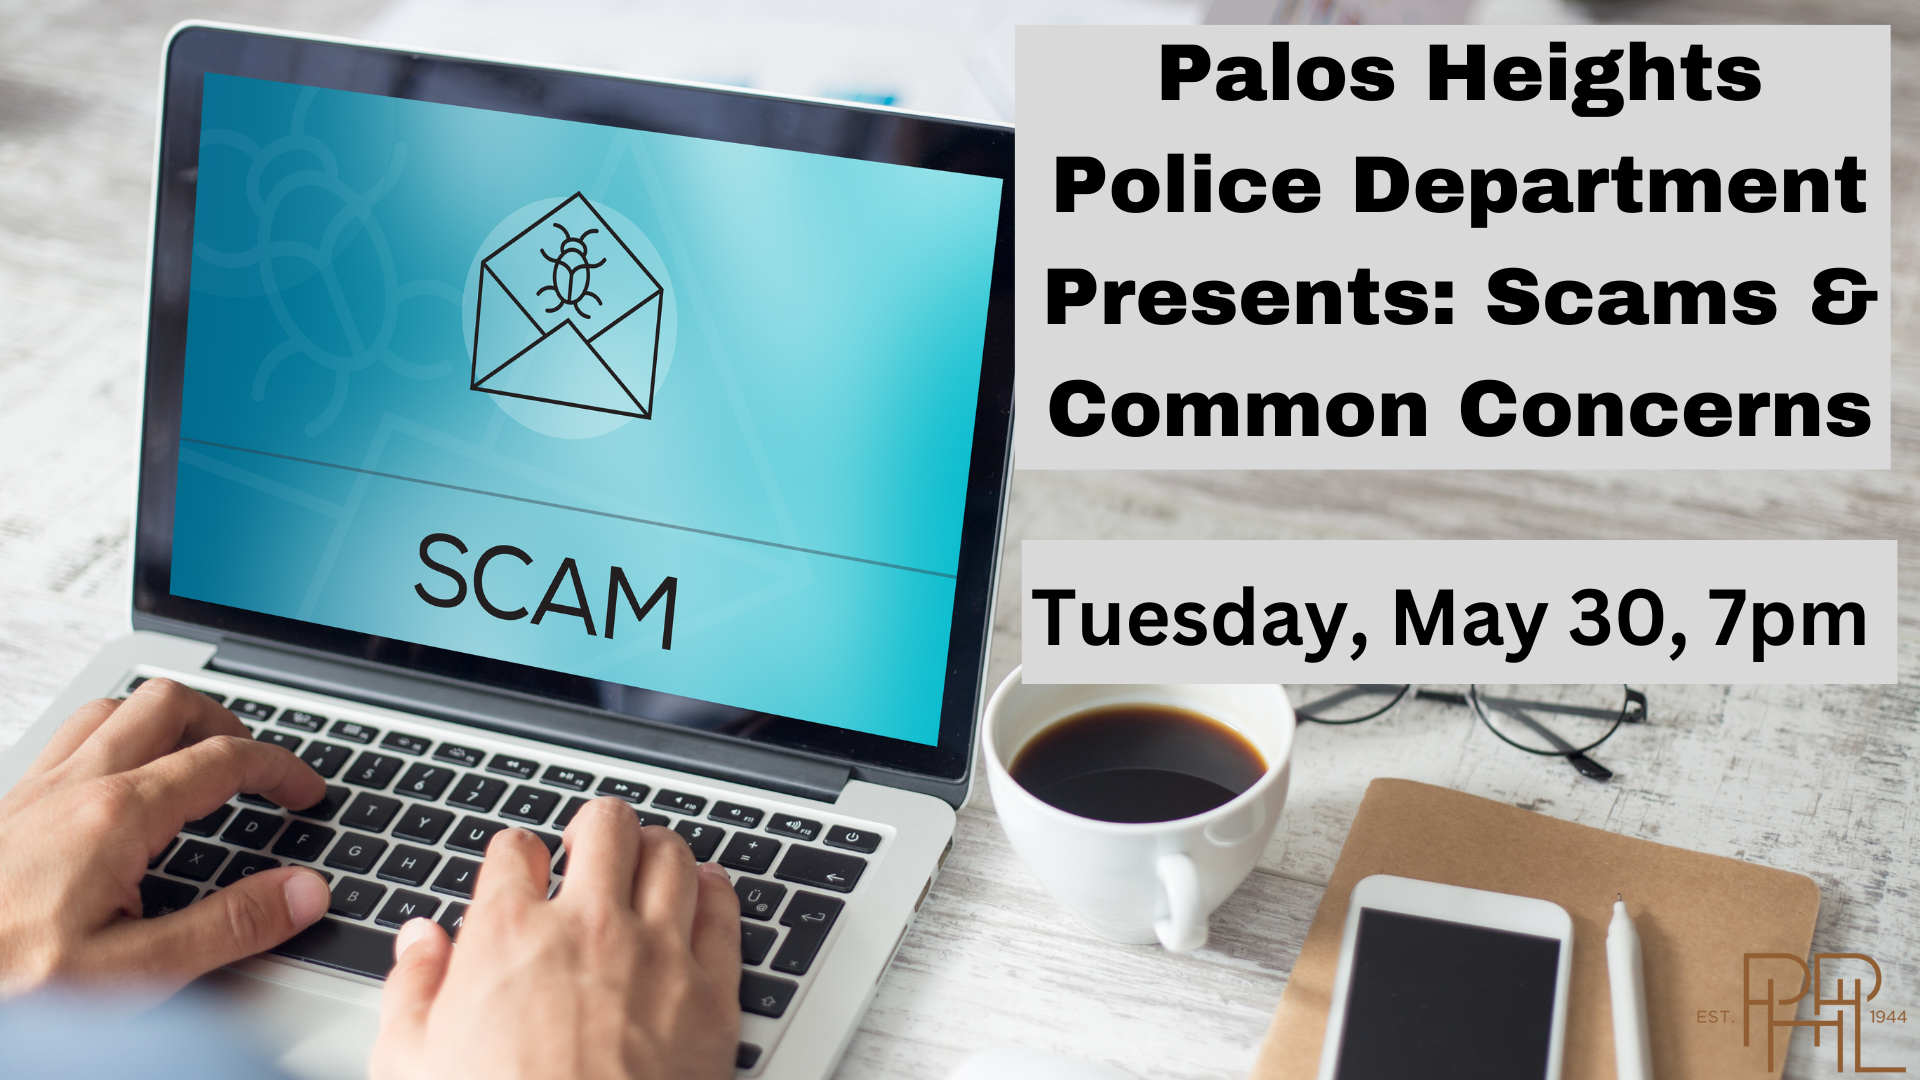 Palos Heights Police Department Presents Scams & Common Concerns for